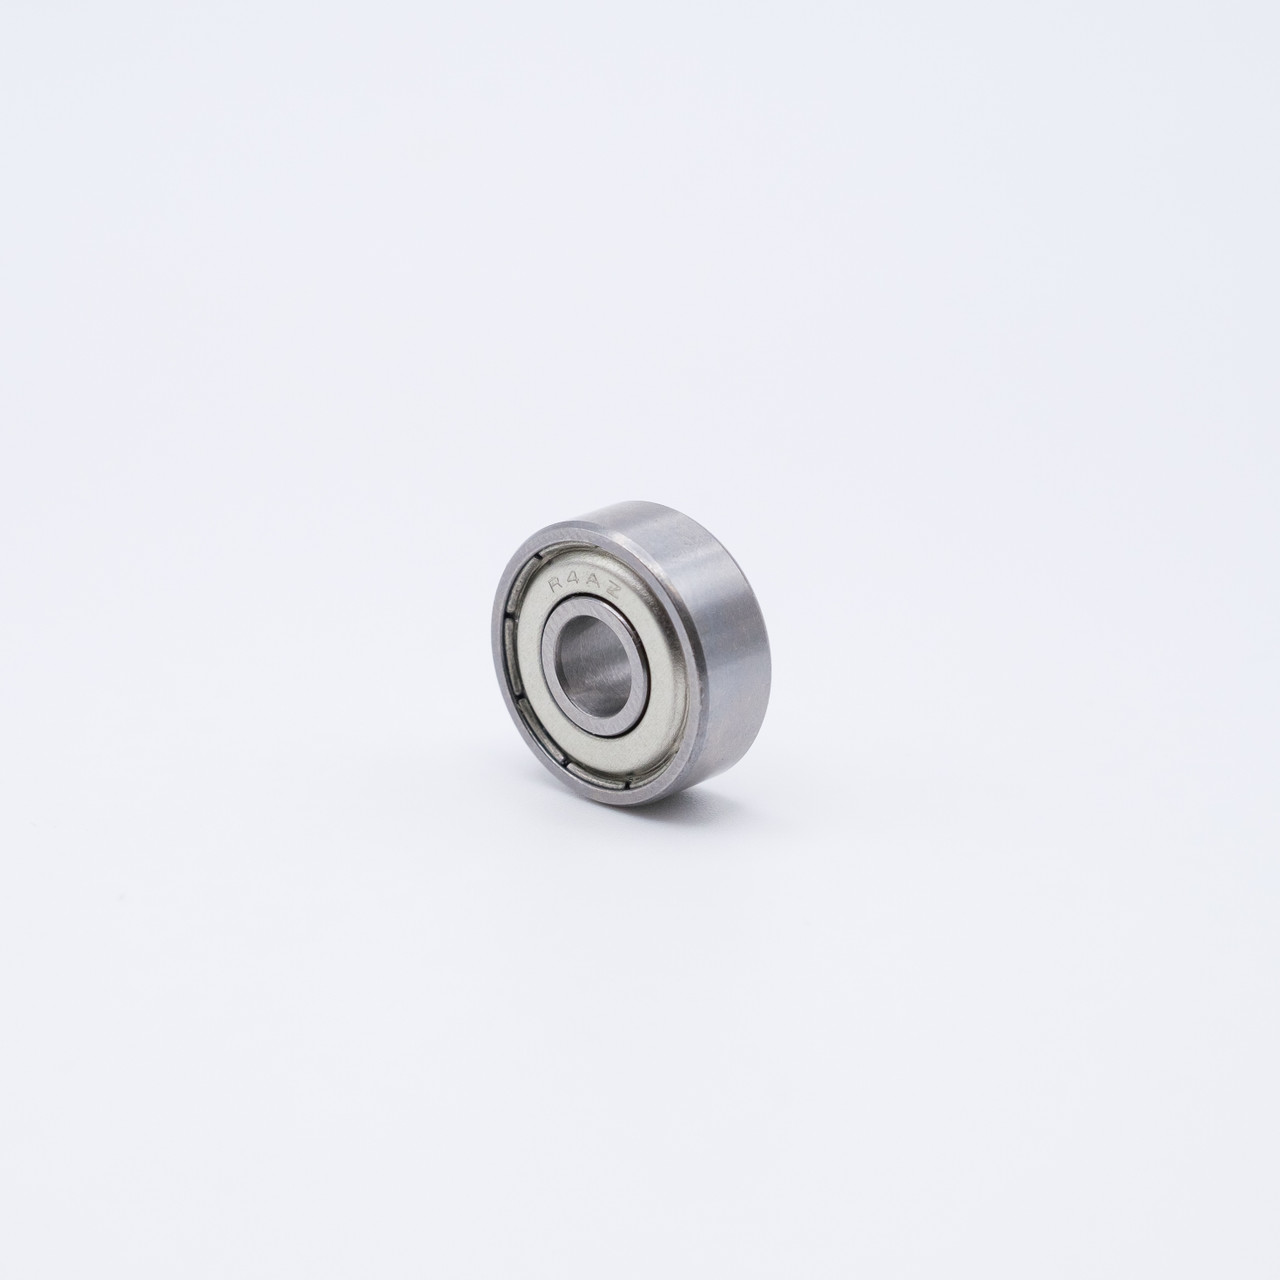 SS693-ZZ Stainless Steel Miniature Ball Bearing 3x8x4 Angled View